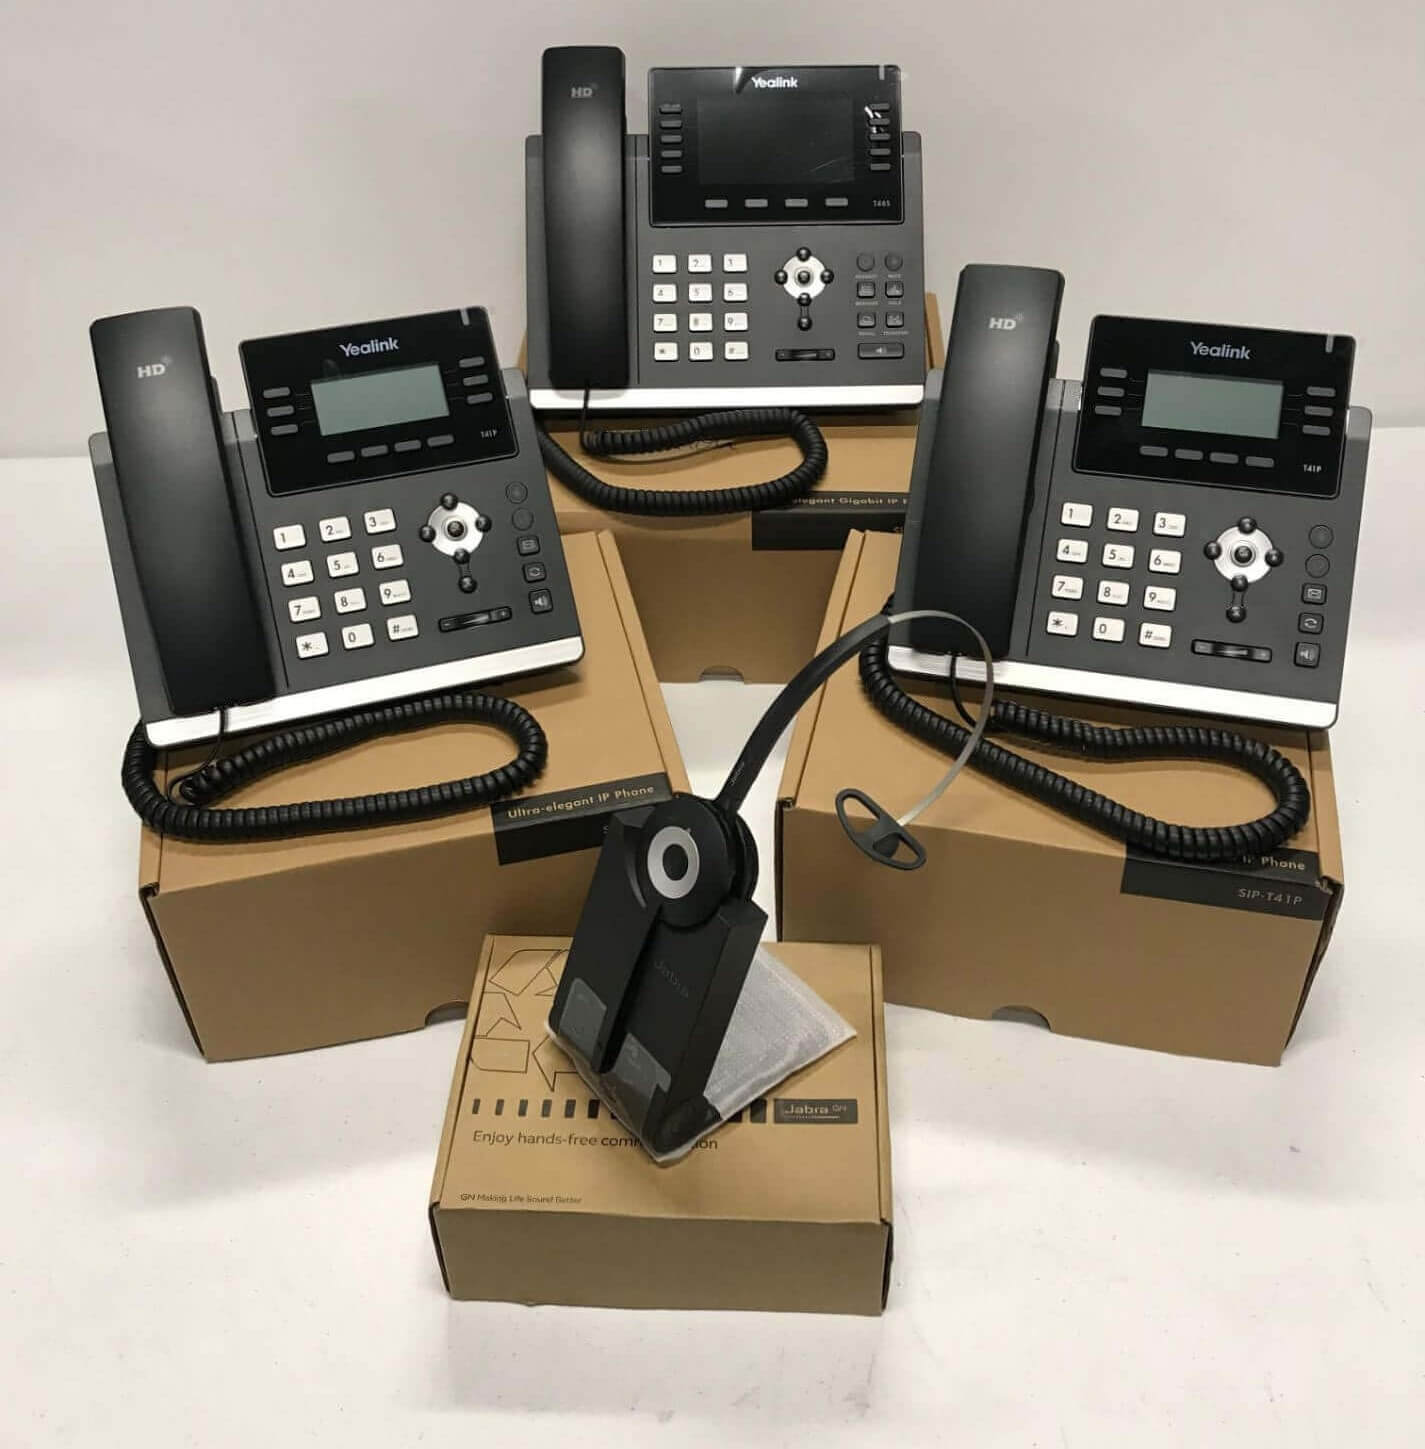 Cloud Hosted Phone System with phones and cordless headset 